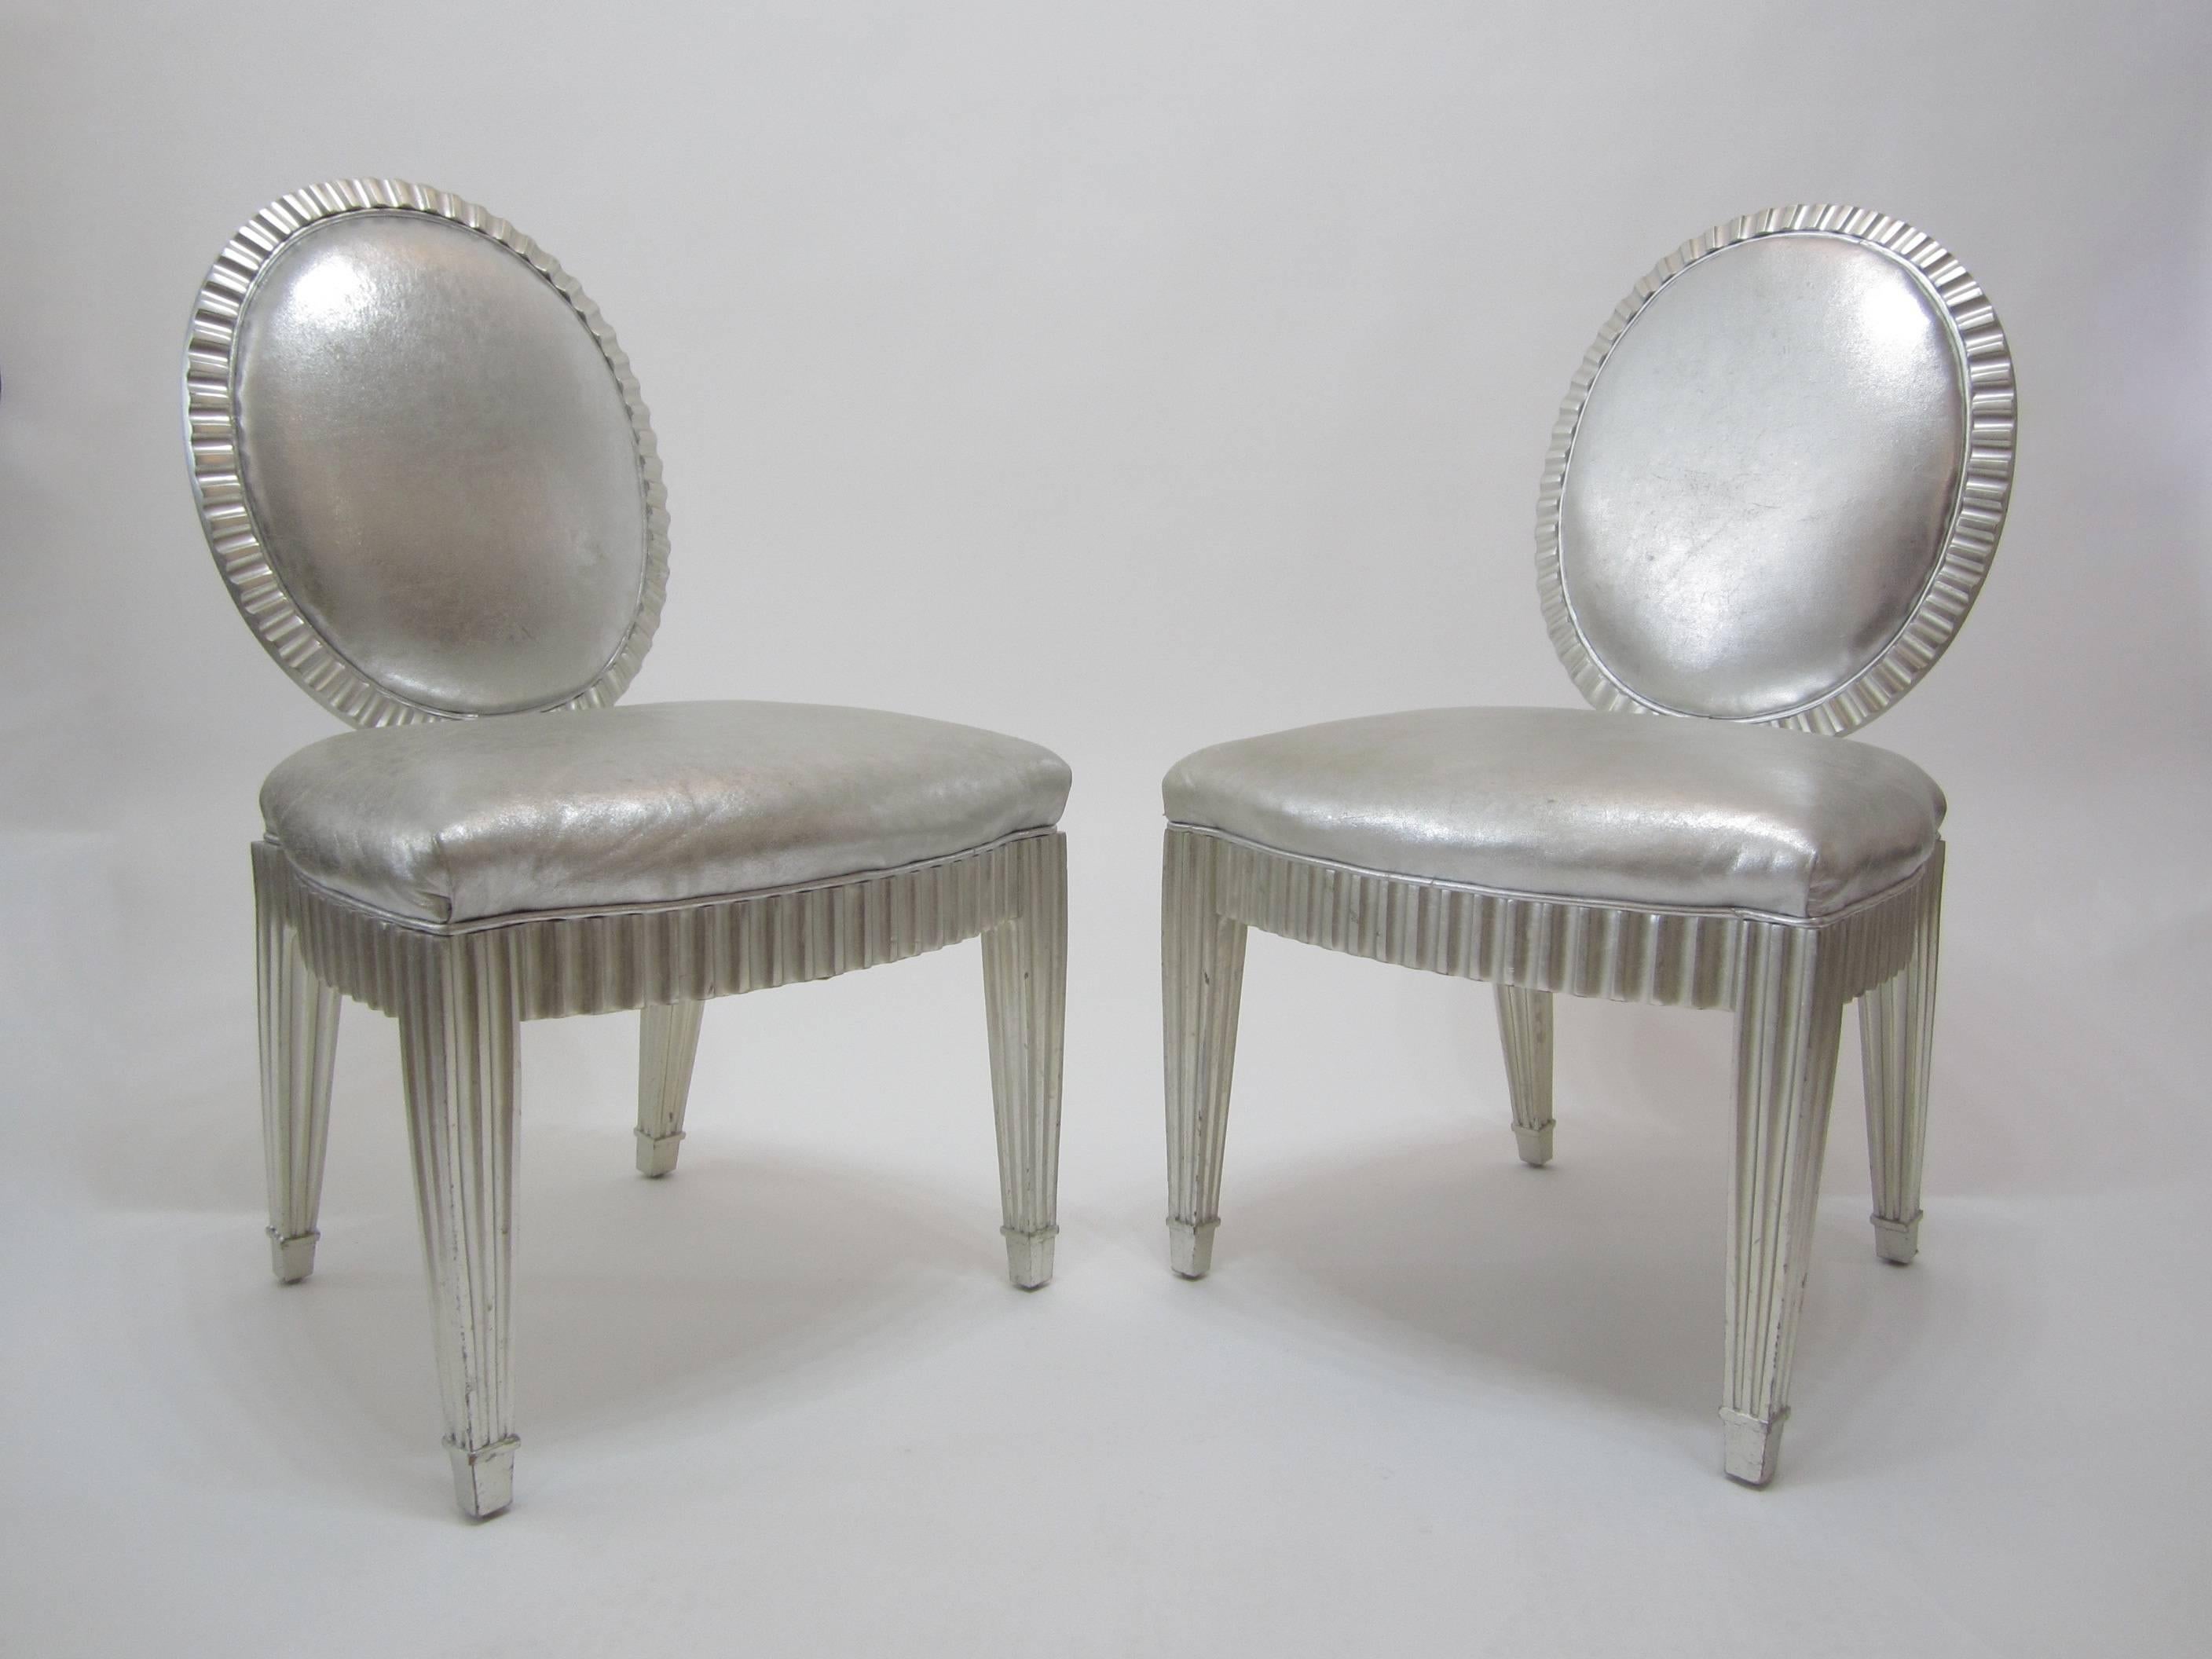 Pair of Silver Leaf and Silver Metallic Leather Neoclassical Chairs by Donghia 1